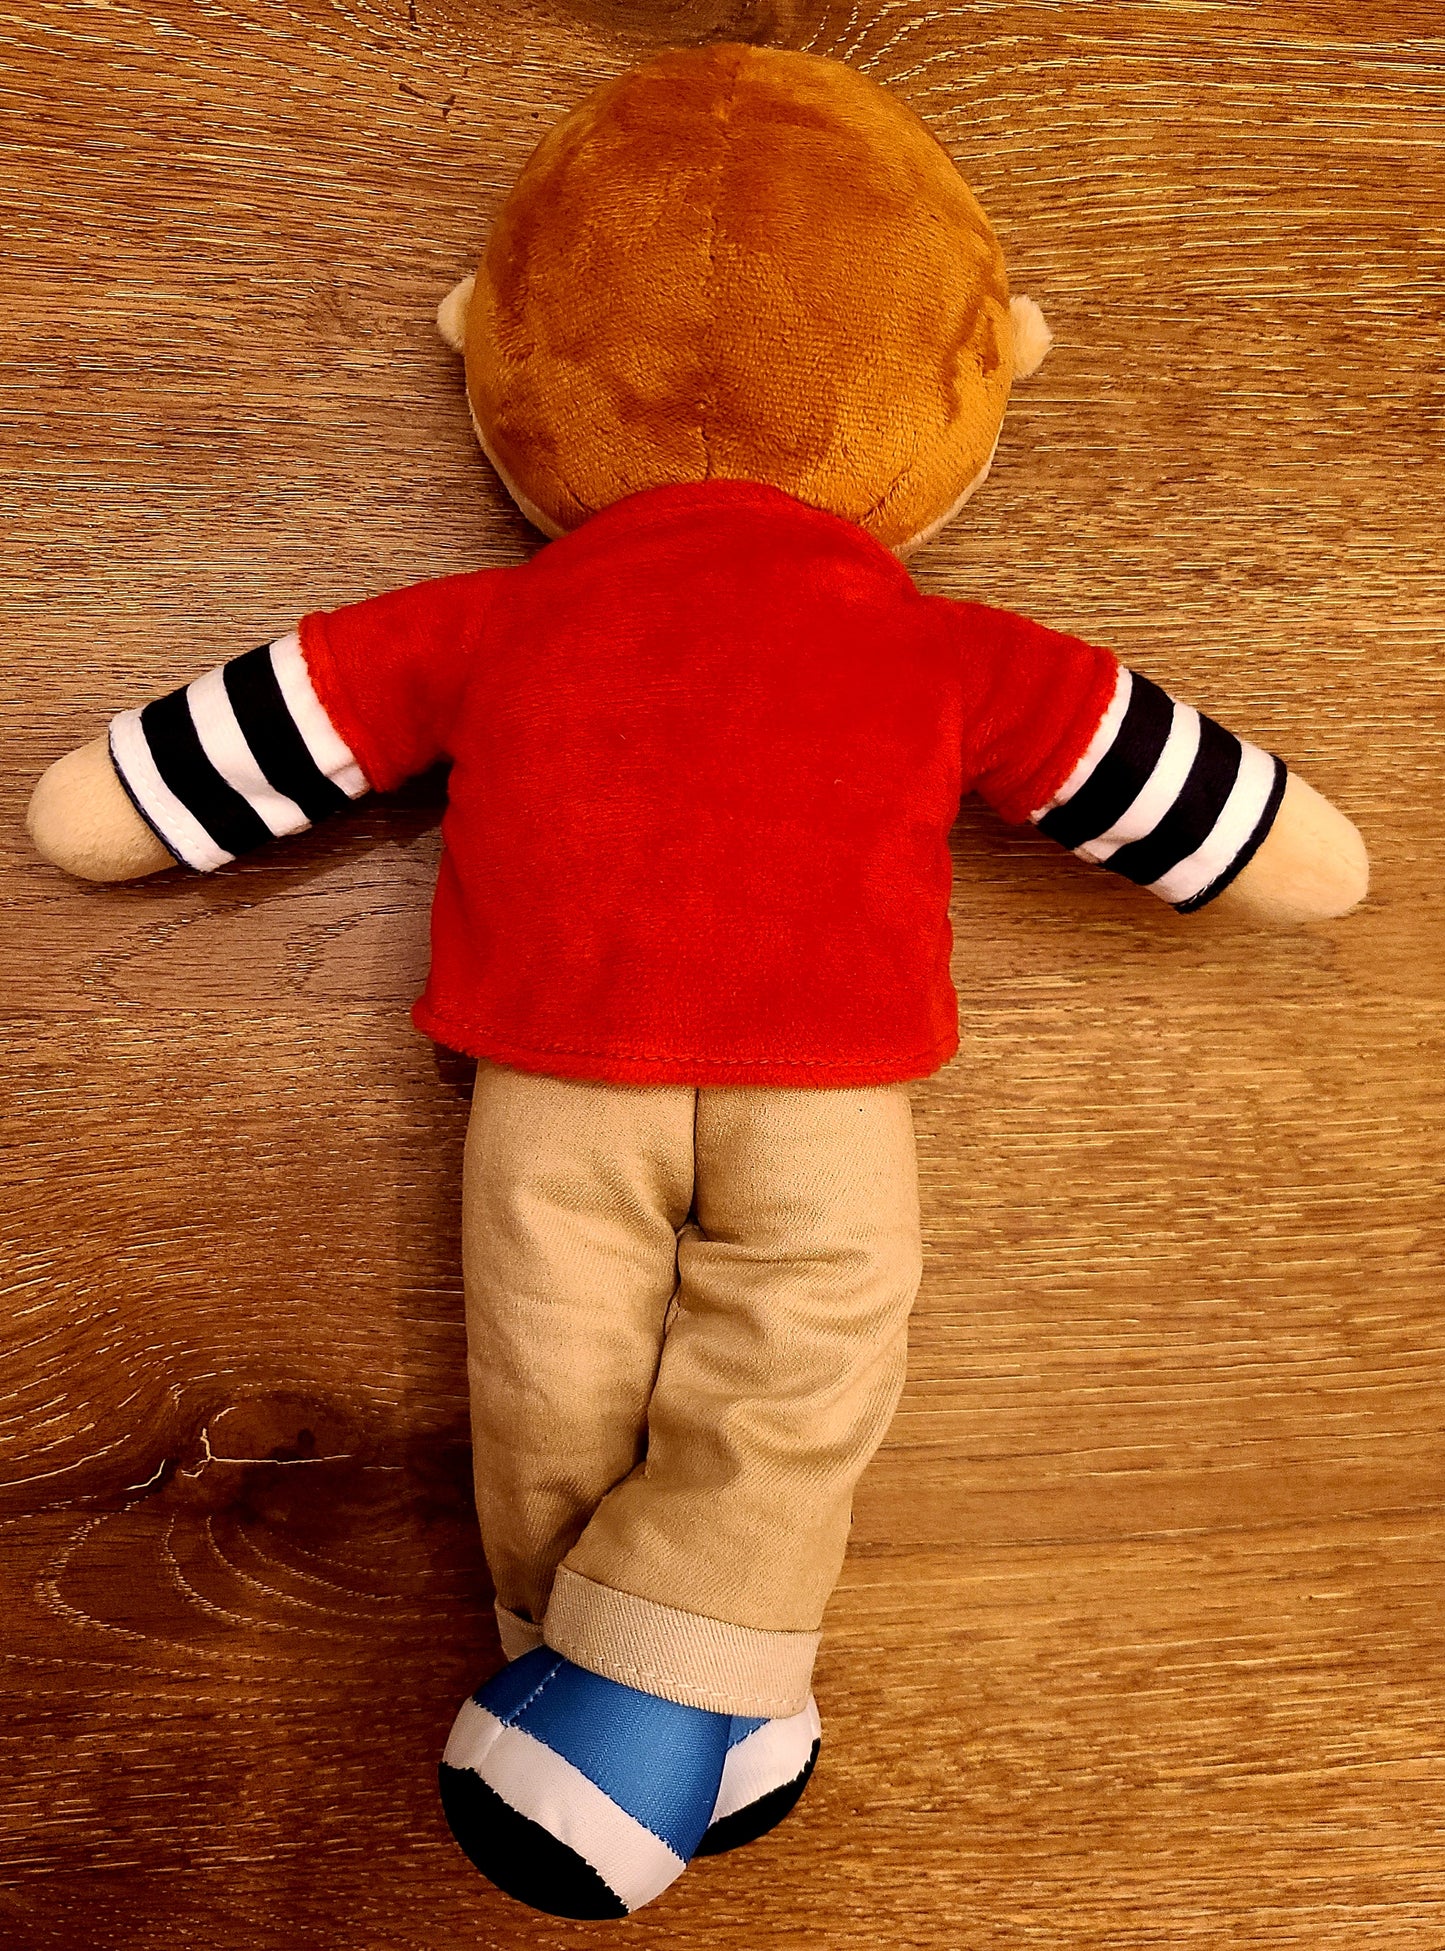 Yanni The Friendly Ginger Hair Boy Soft 14in Plush Rag Doll Toy With Khaki Jeans